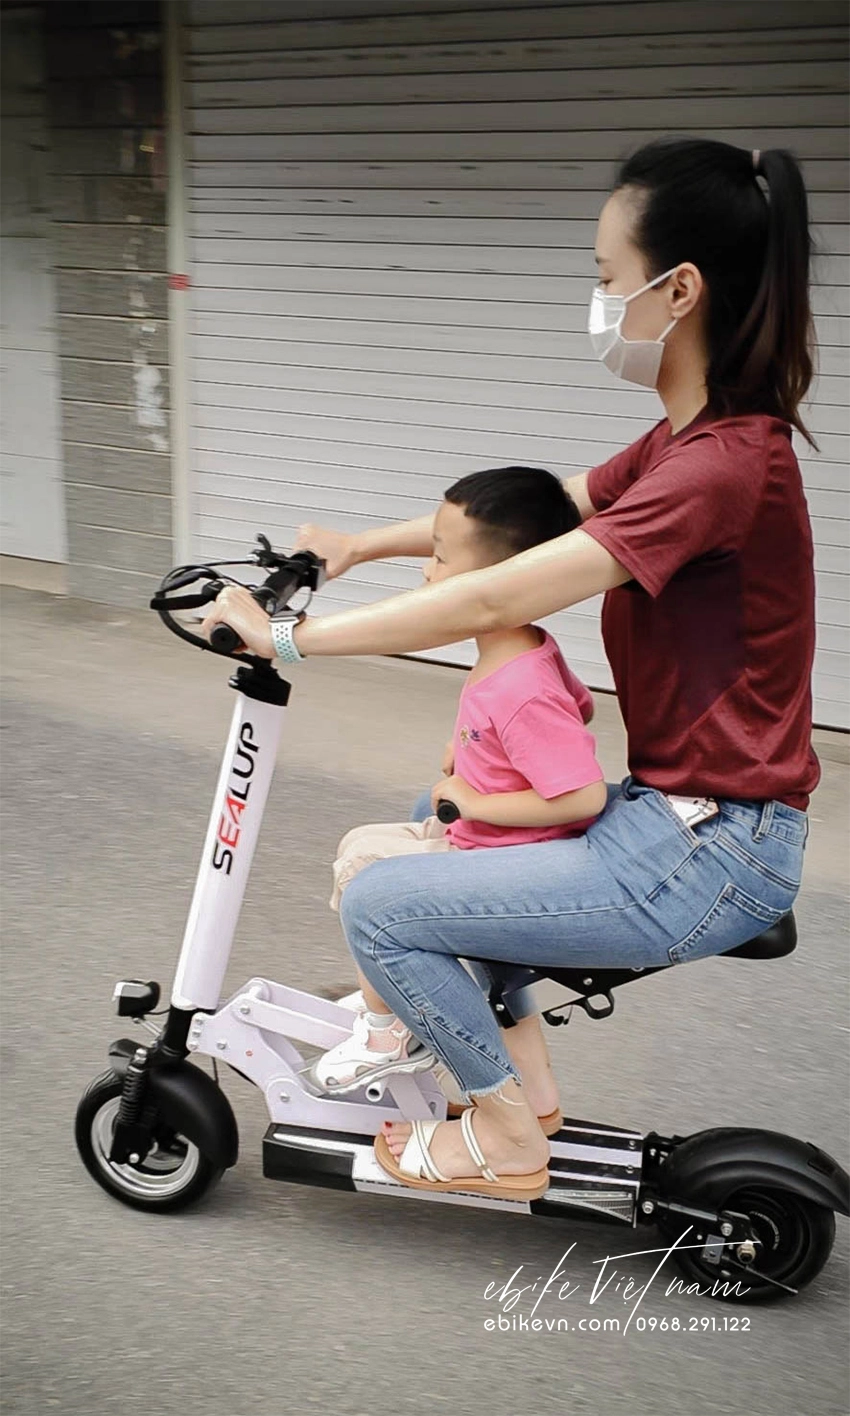 Hinh Anh Scooter Sealup Q13 -Ebikevn (3)